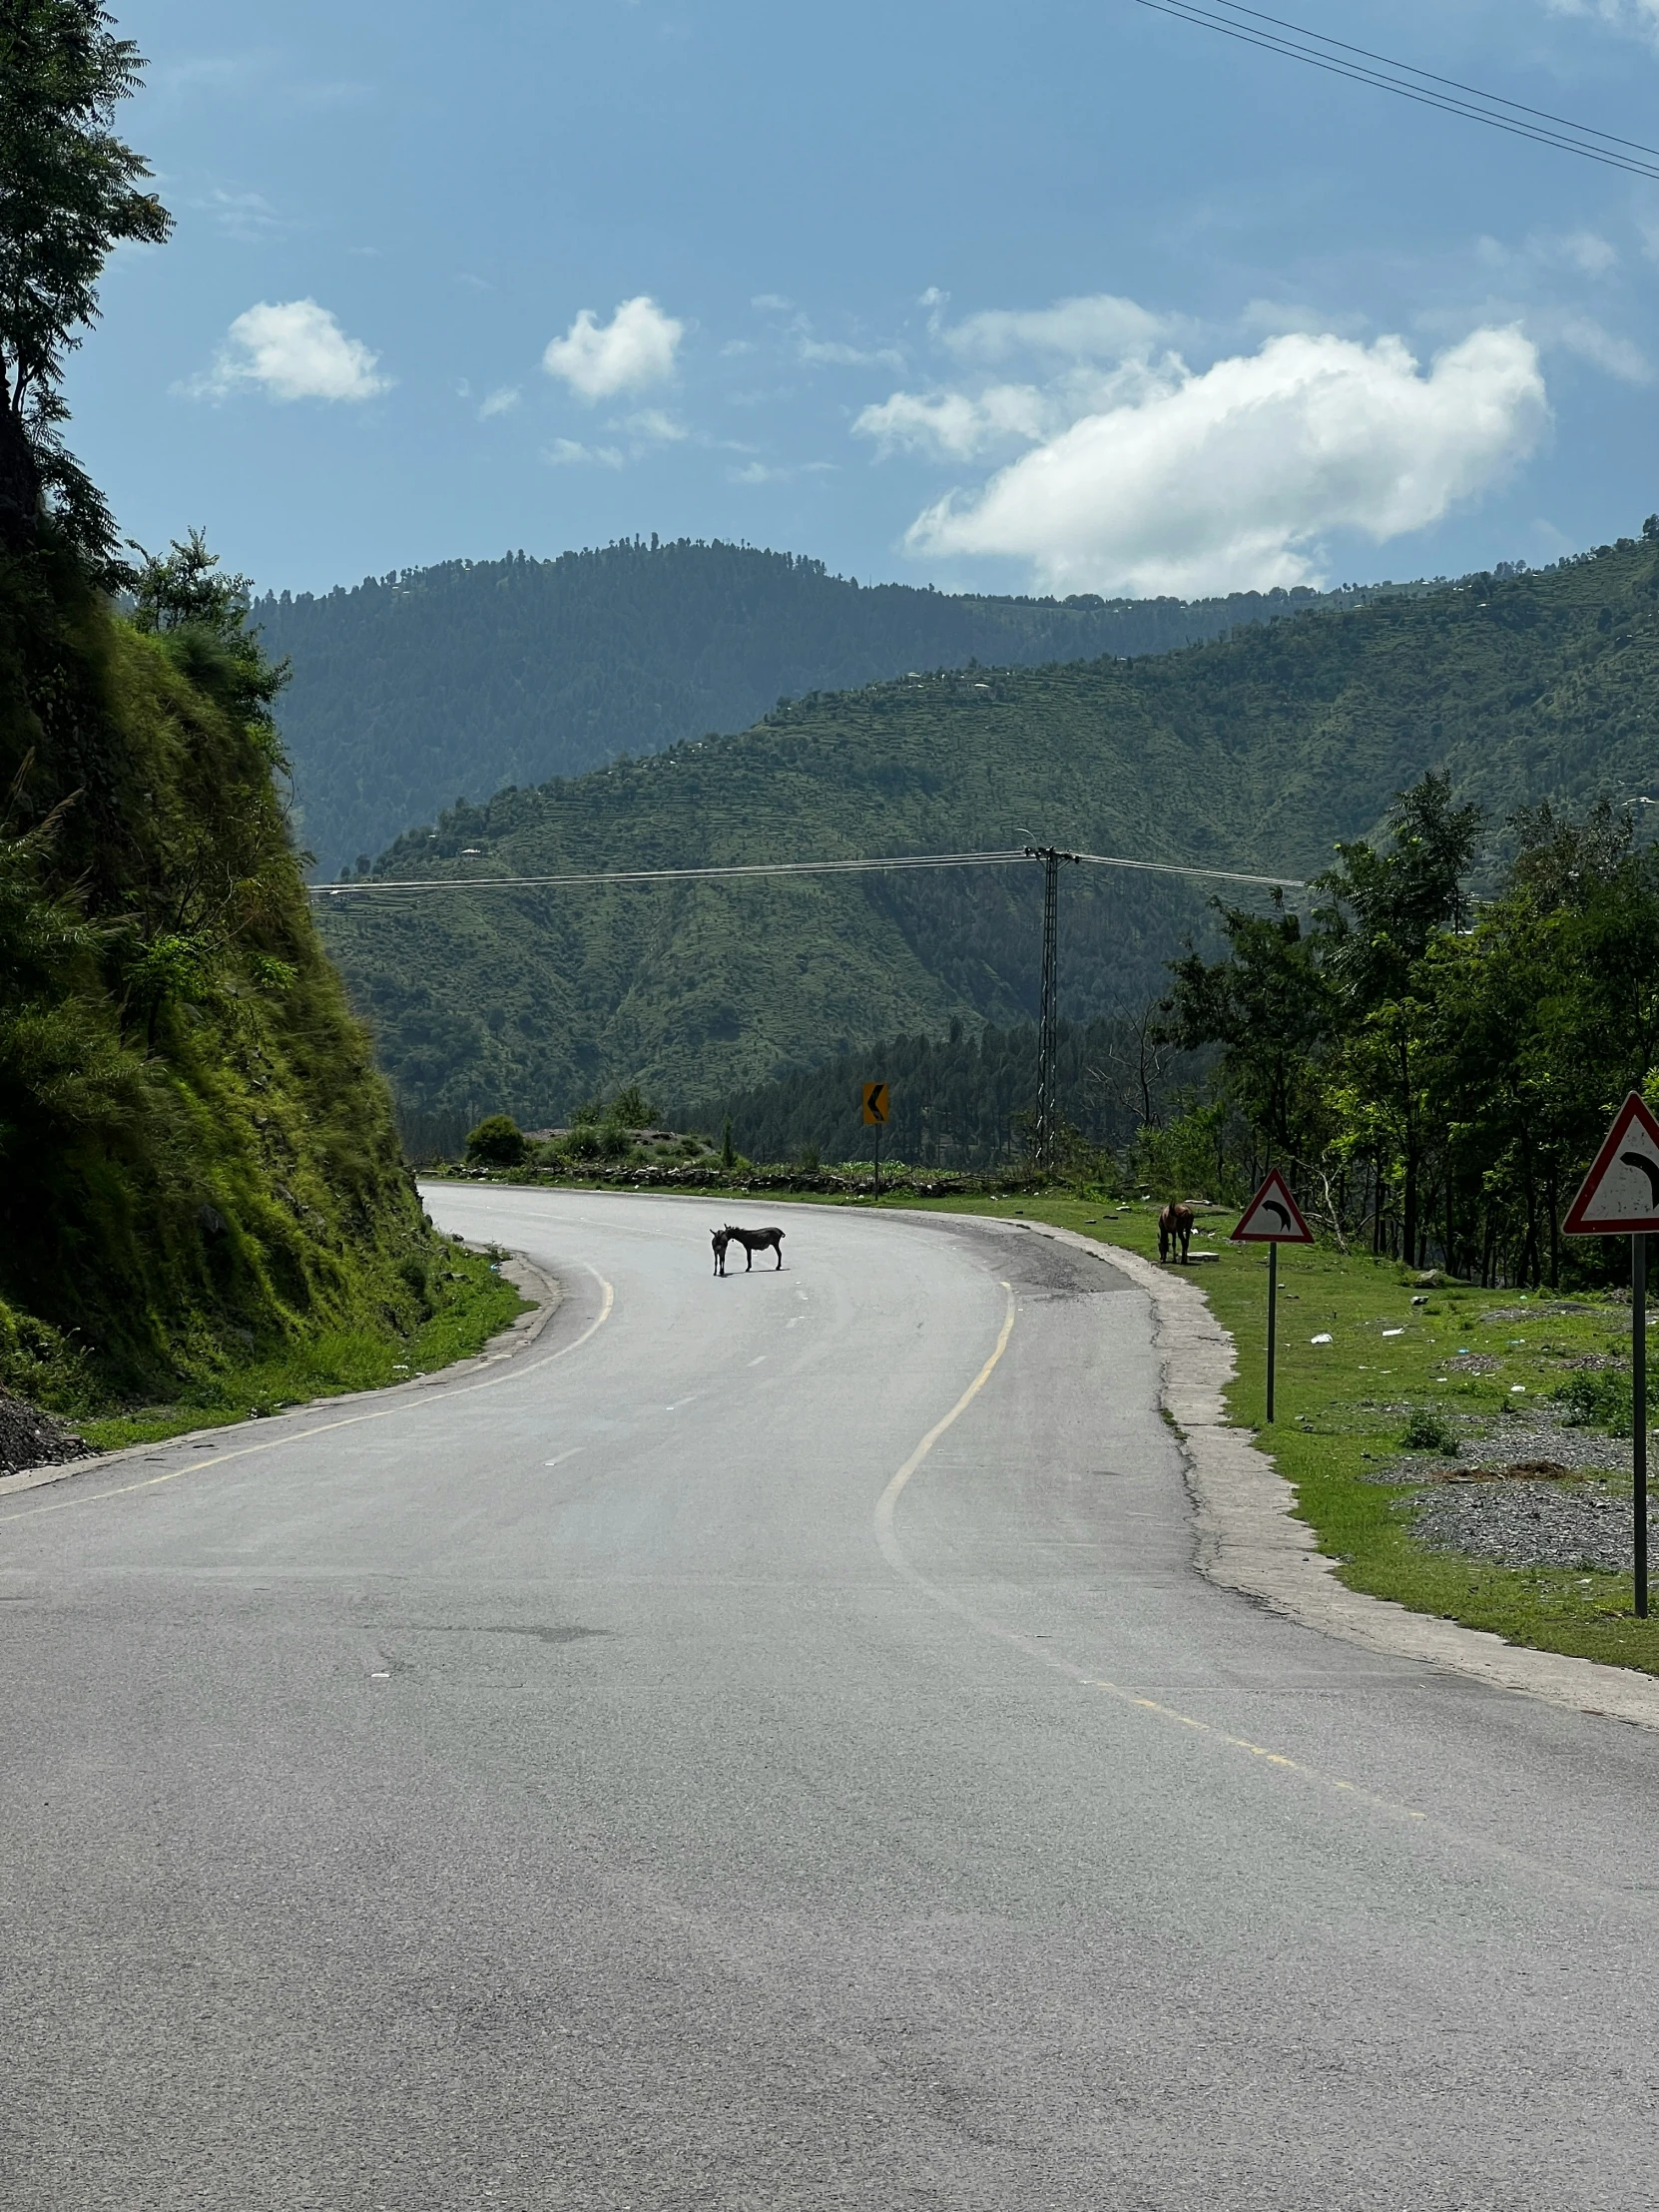 two dogs walking on the side of the road